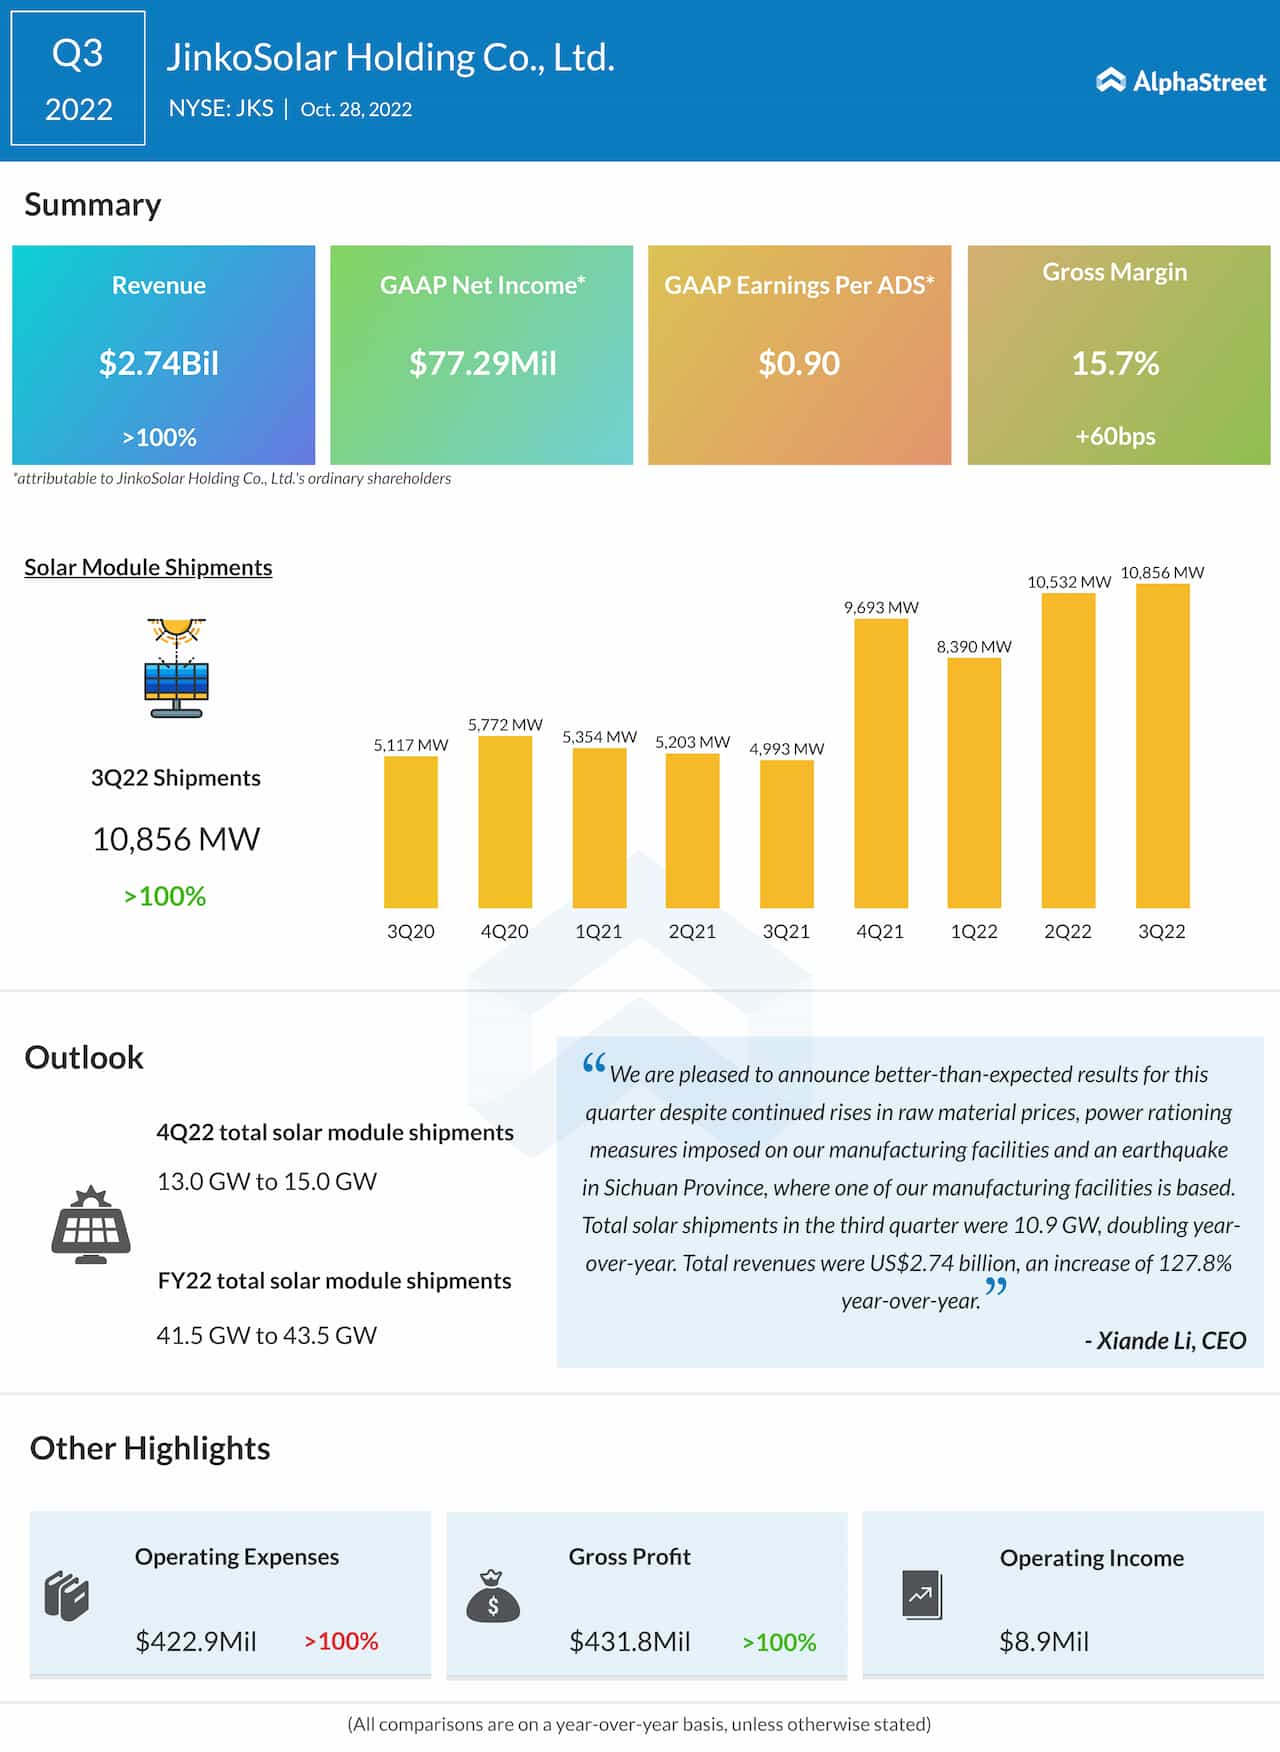 Earnings Infographic: Highlights of JinkoSolar’s Q3 2022 results